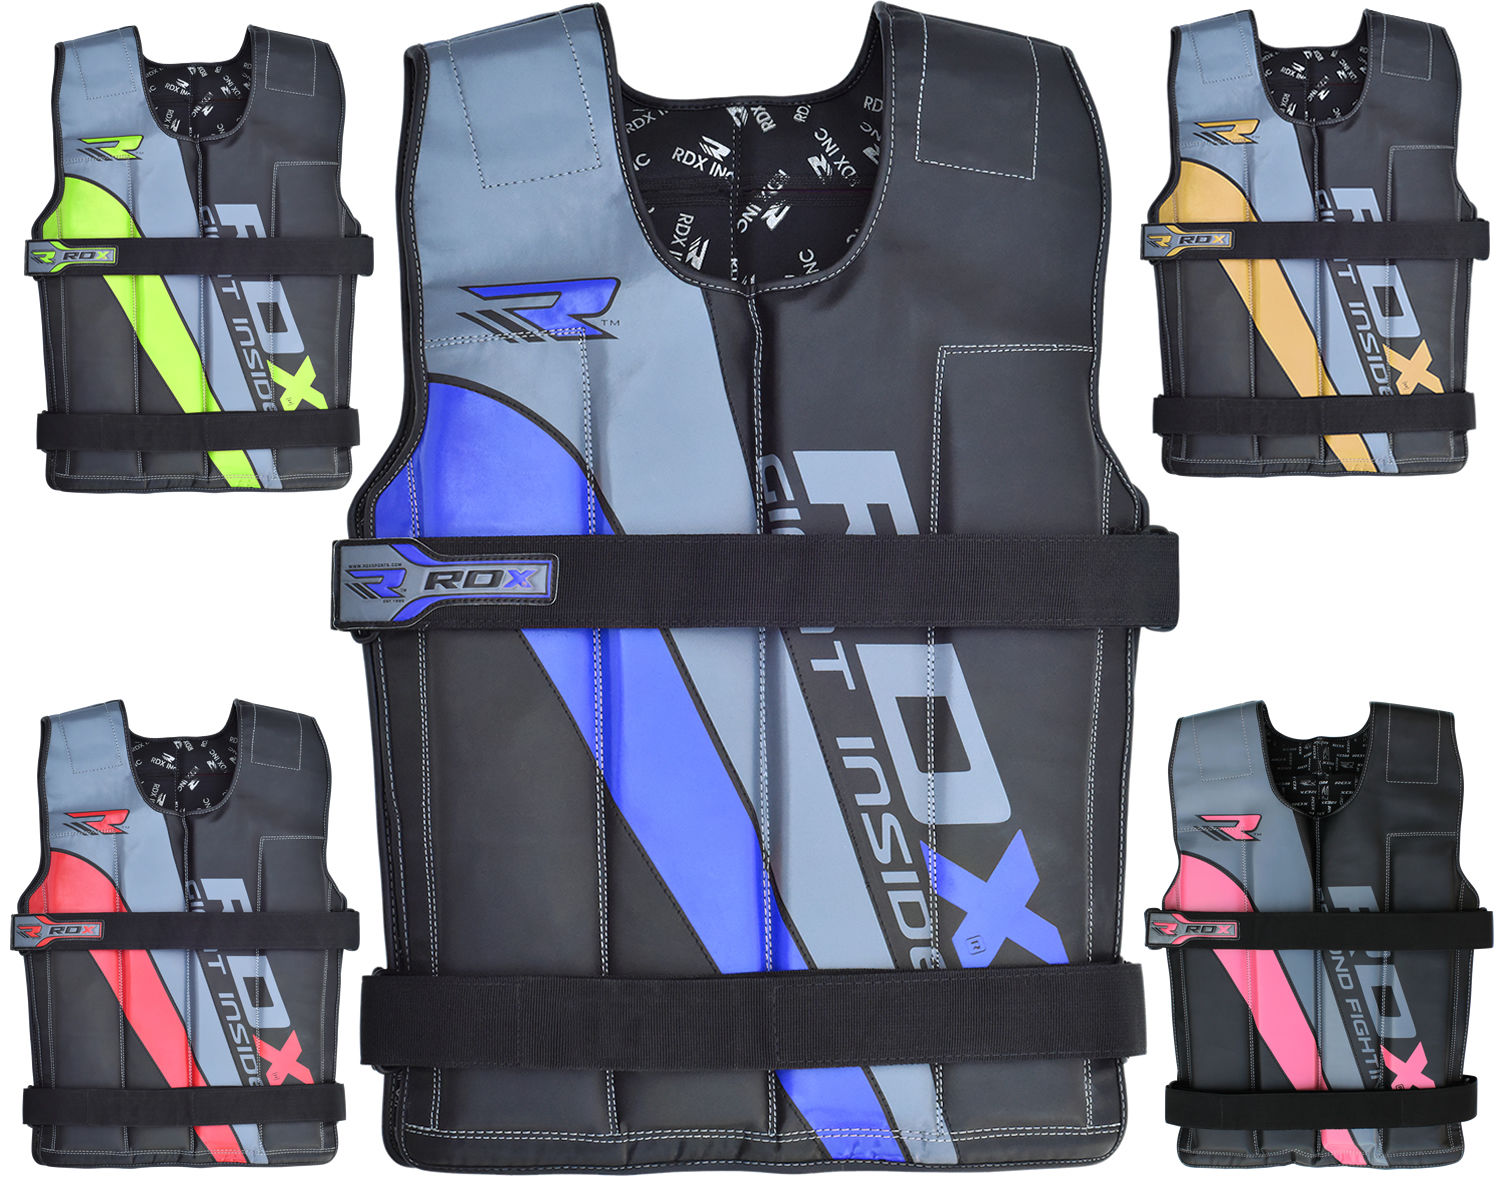 RDX Adjustable Weighted Vest Fitness Weight Jacket Training Workout Exercise